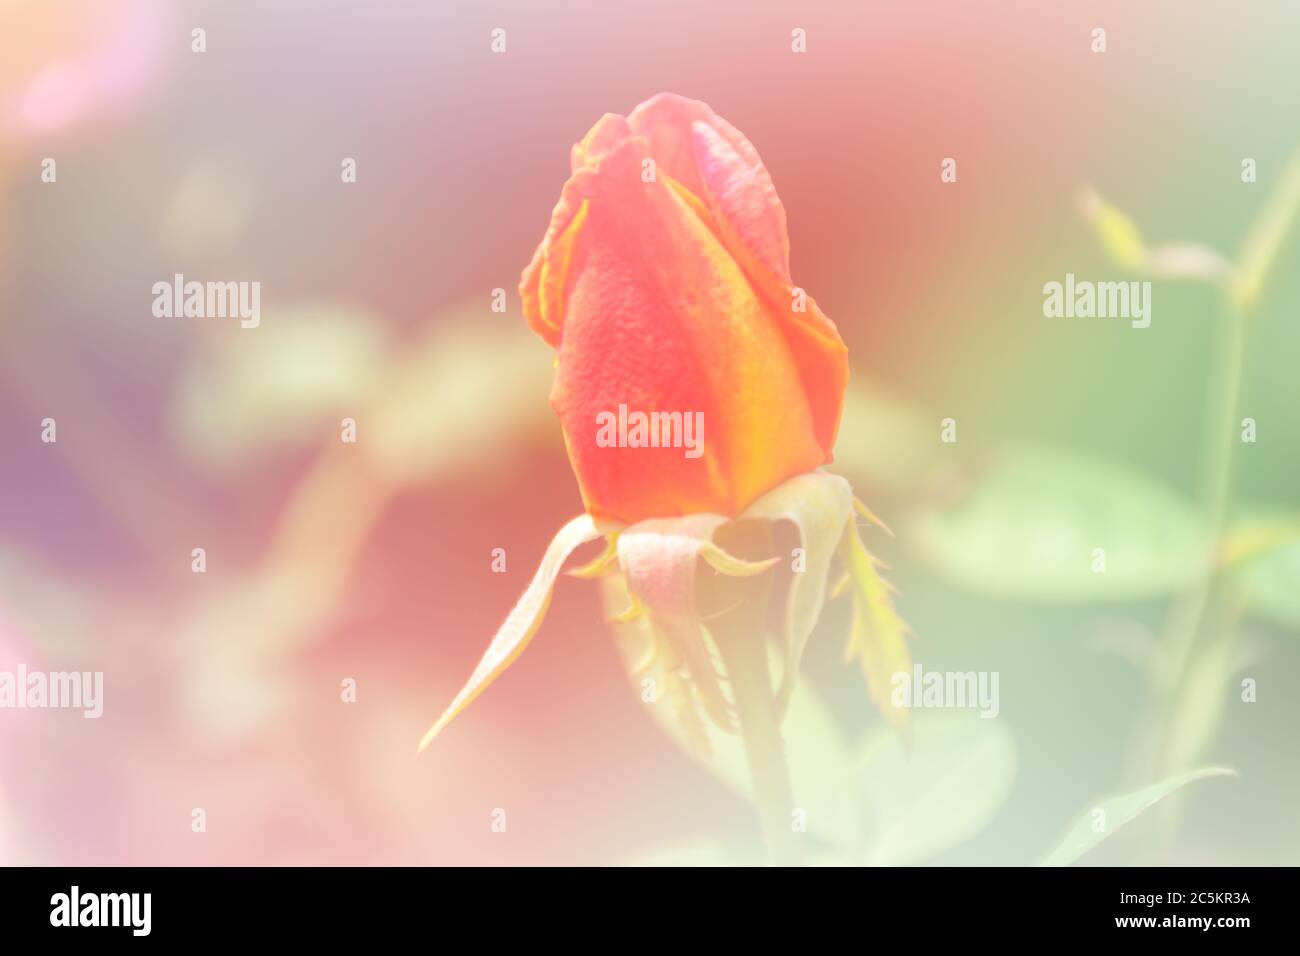 Horizontal red, yellow and green rosebud background with copy space, suitable for a greeting card. Stock Photo